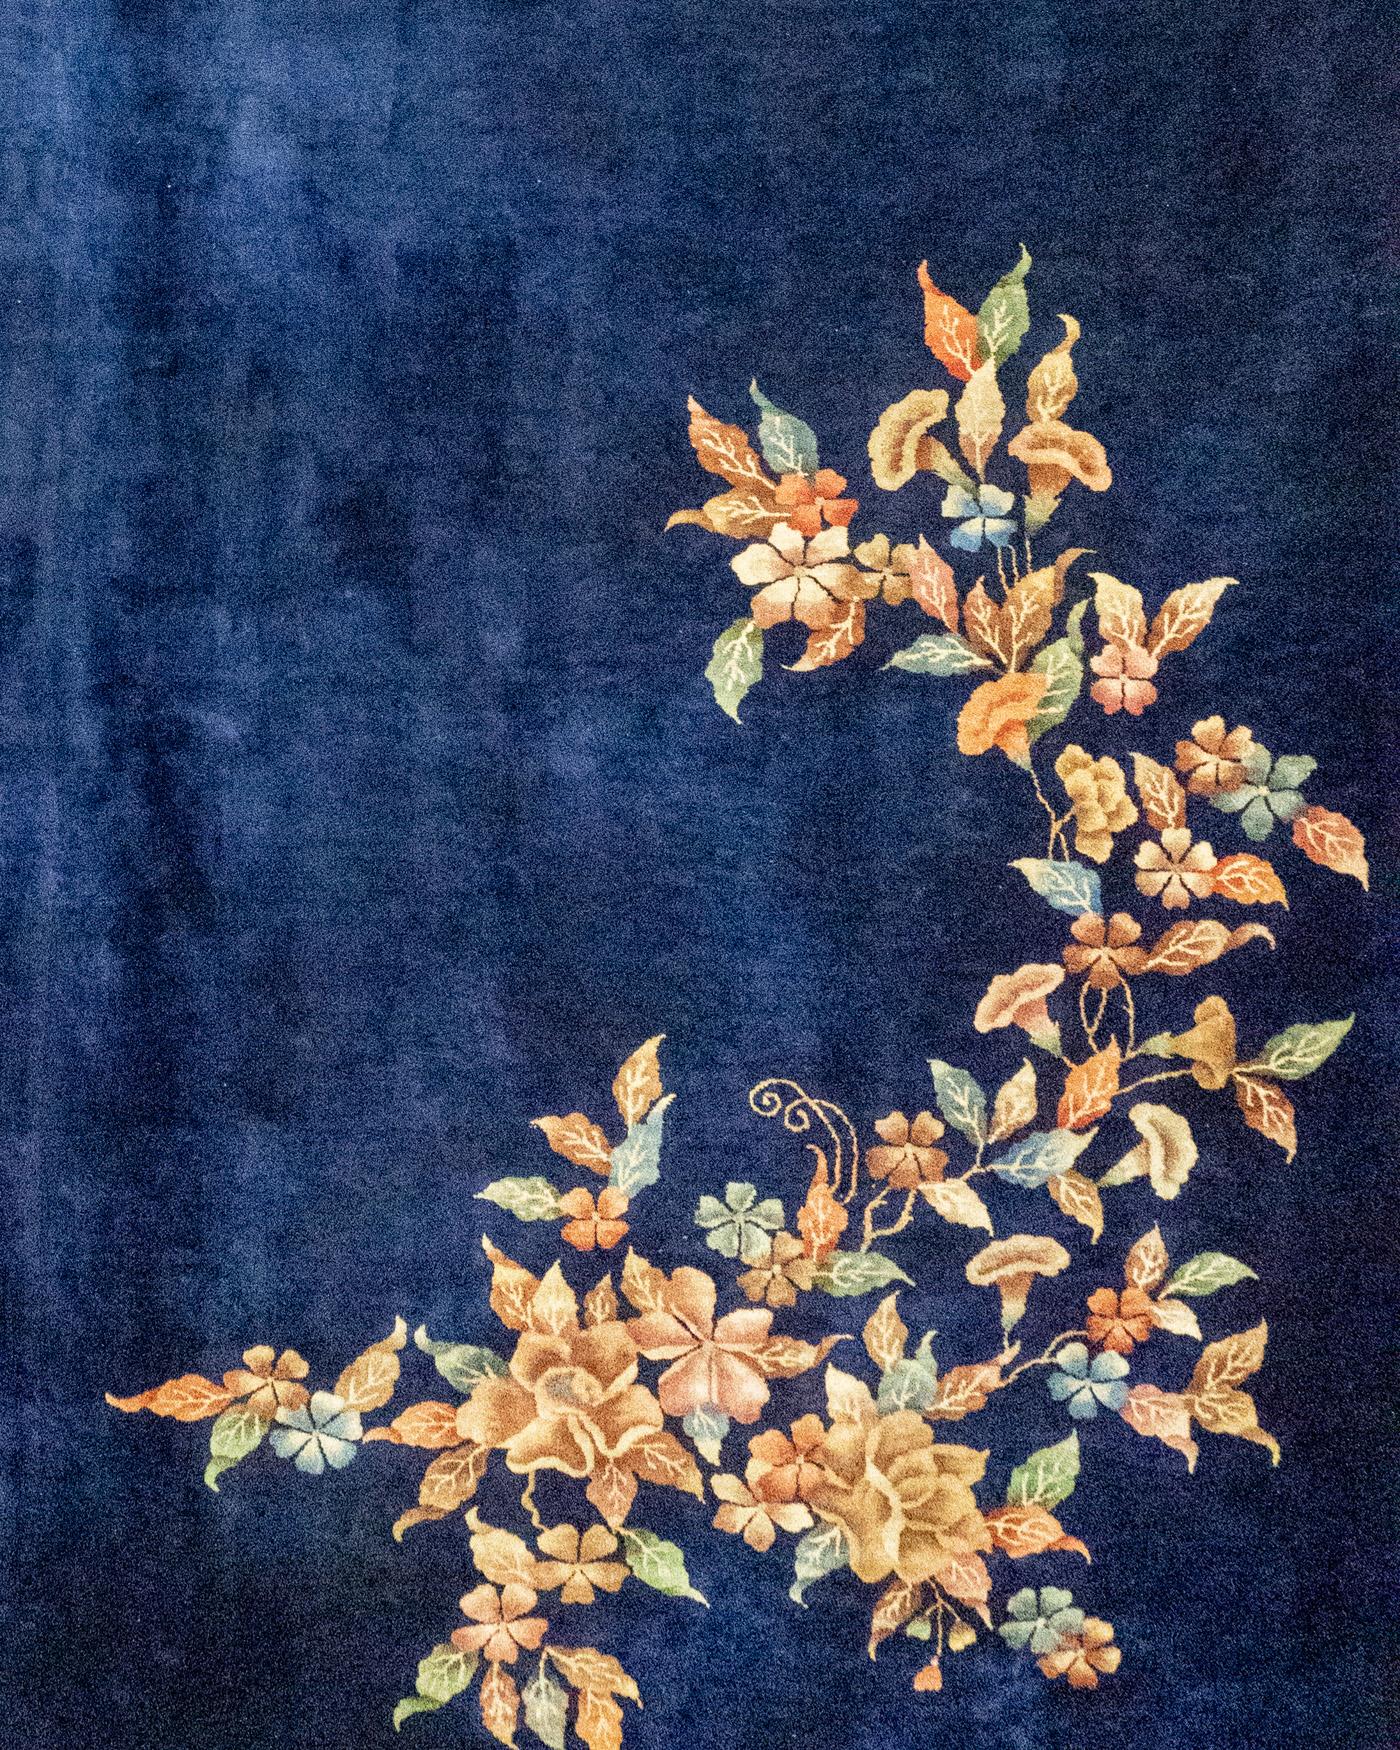 Antique Chinese Art Deco area rug 12' X 19'3. A wonderful example of a Chinese Art Deco style rug woven circa 1920 with a plain navy ground and in two opposing corners a delightful selection of flowers in a variety of soft and gentle colors. The Art